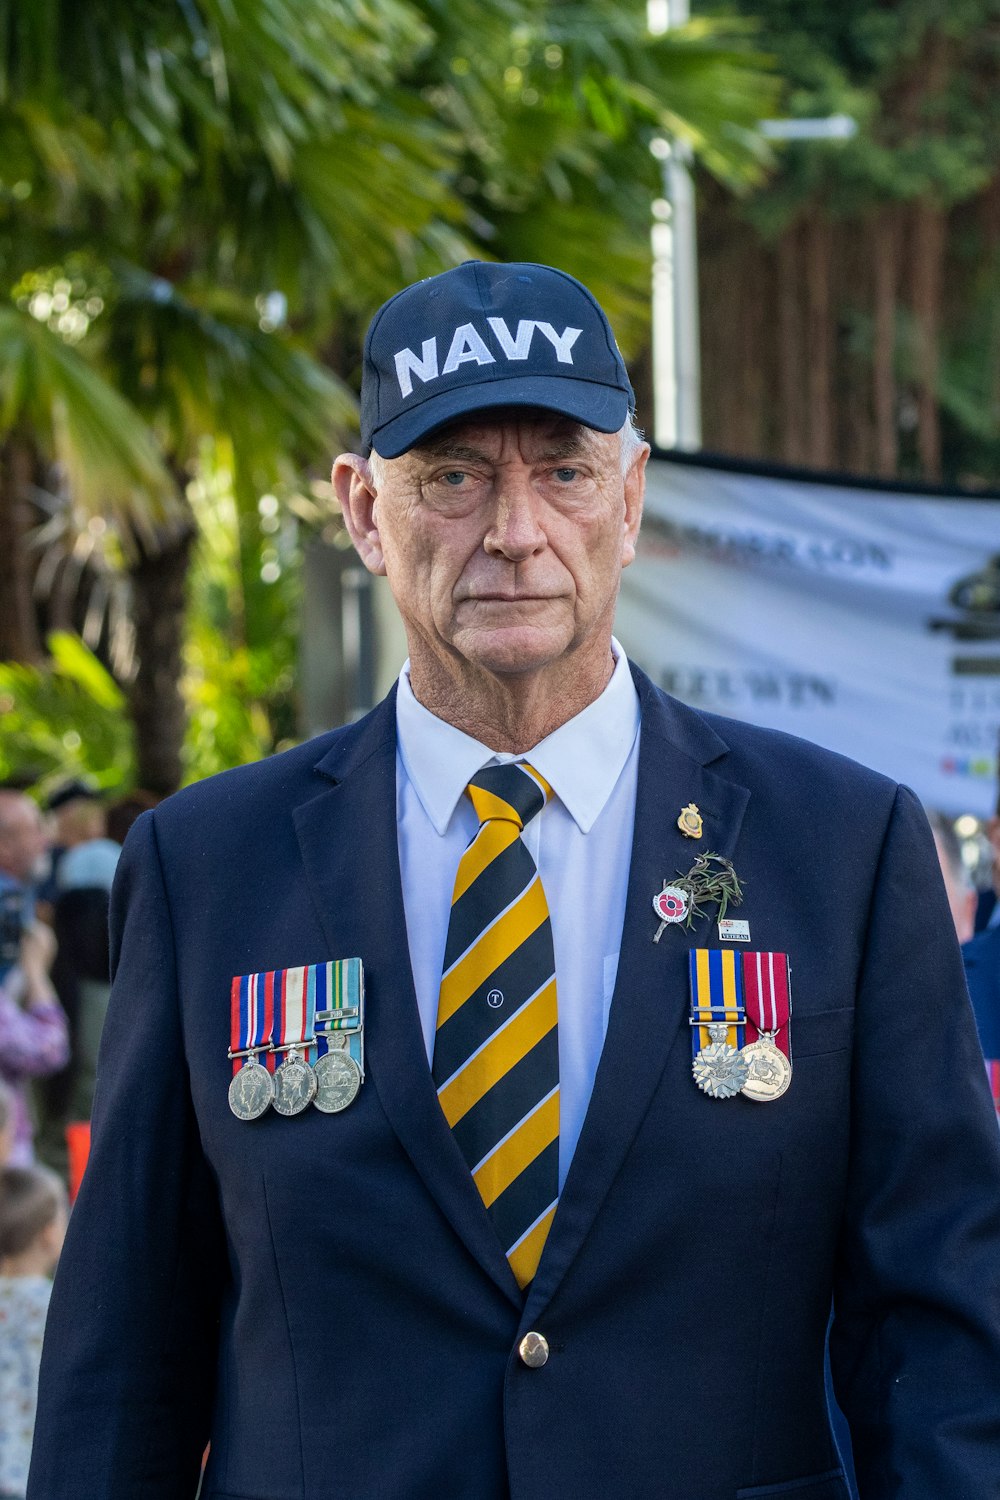 a man in a navy suit with medals on his lapel